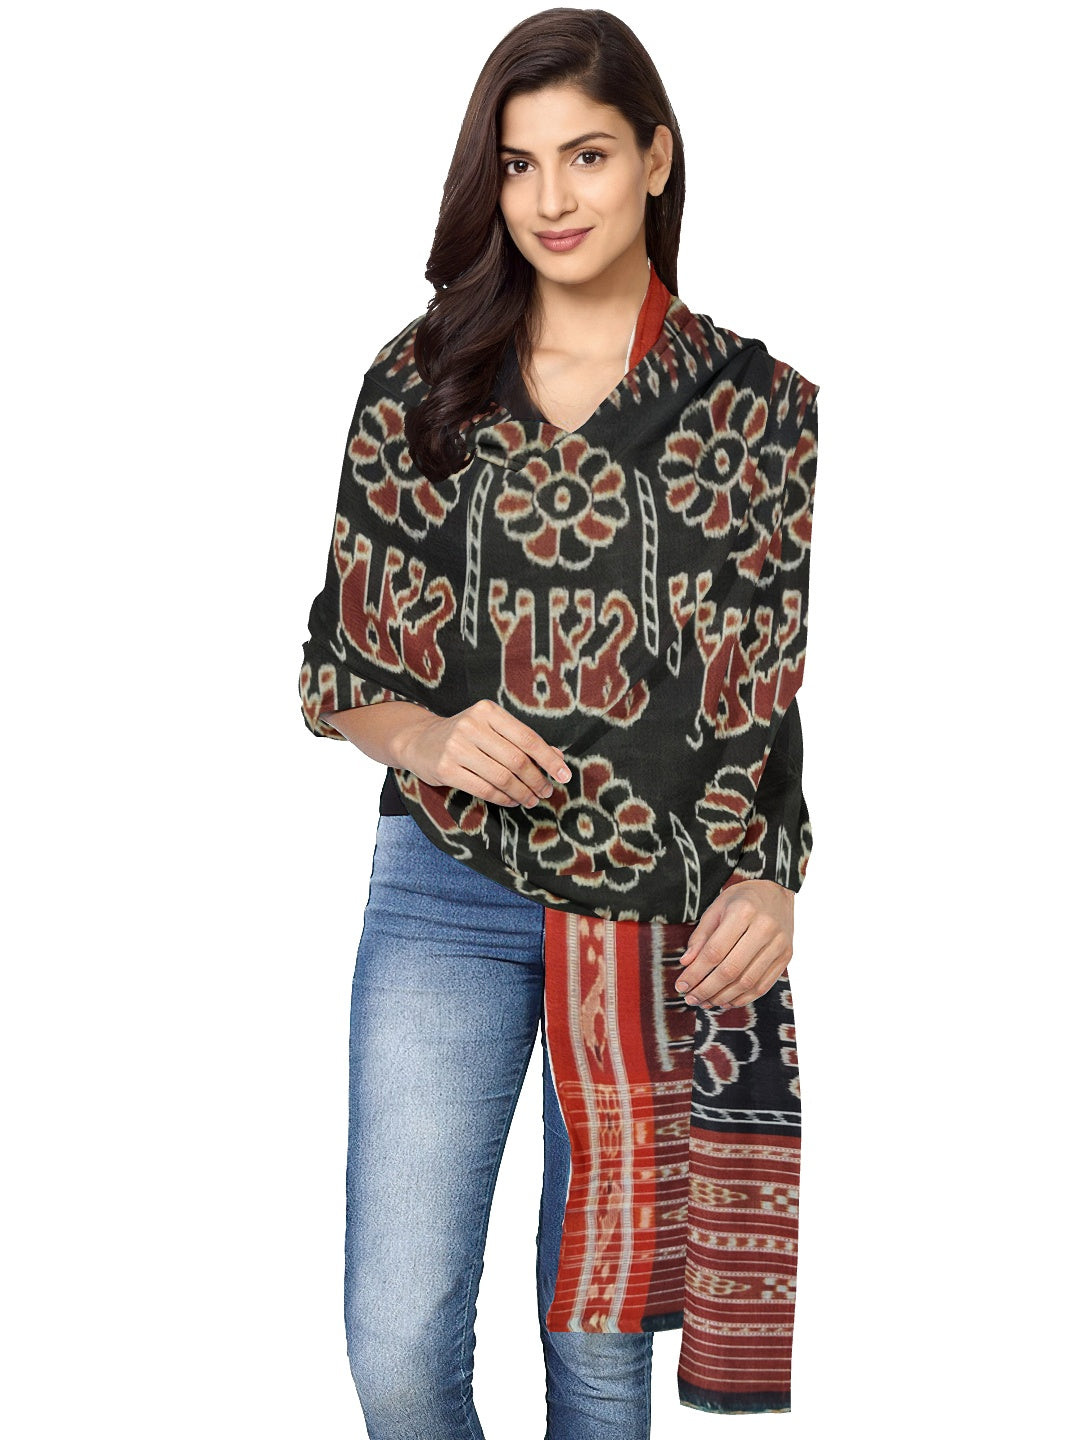 Black and Rust Cotton ikat Dupatta with elephant and flower motifs woven